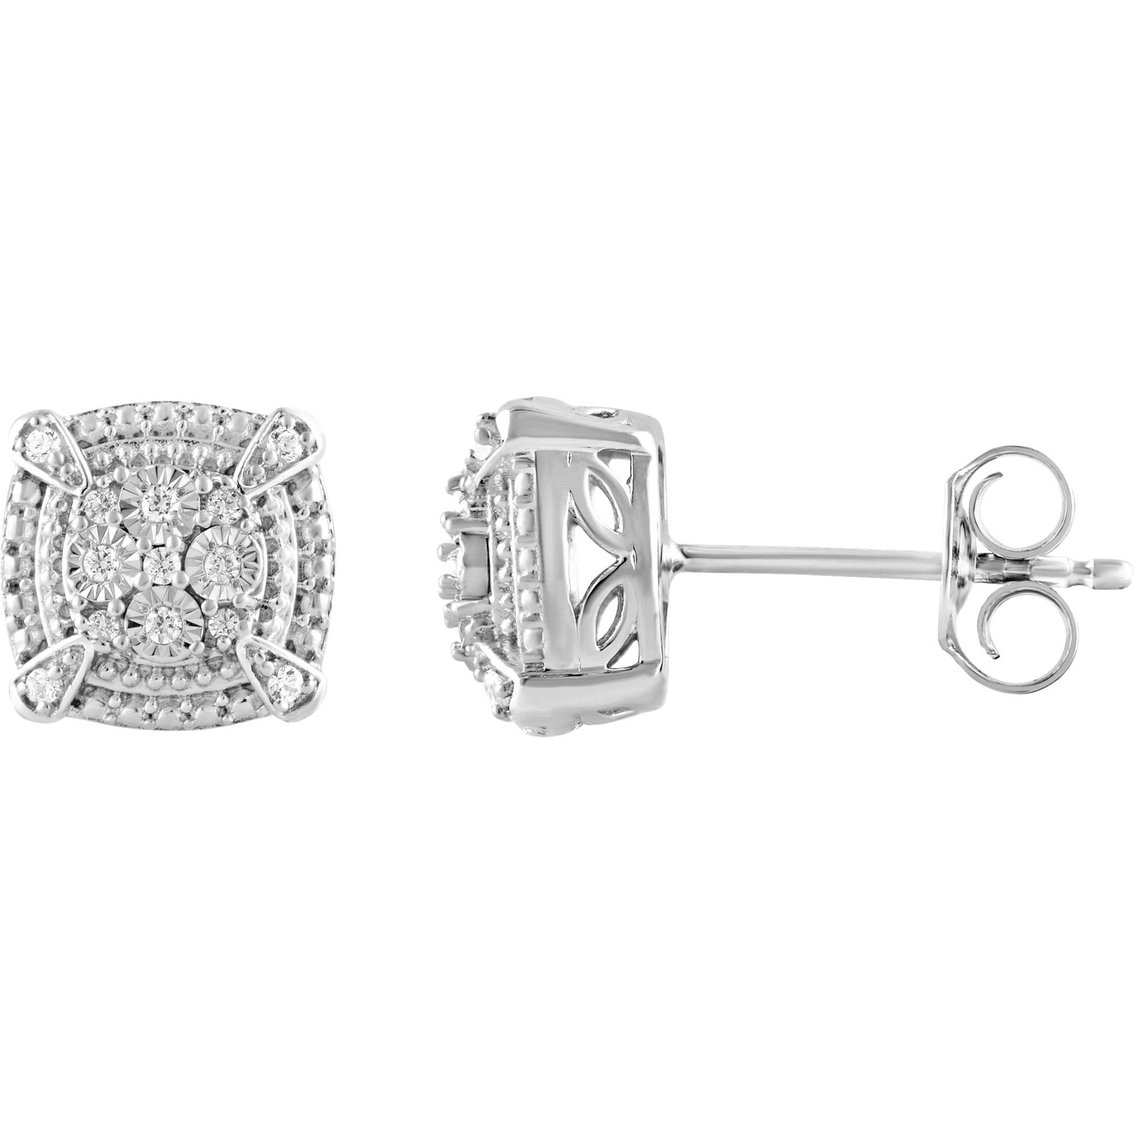 Sterling Silver 1/5 CTW Cushion Frame Diamond Earring and Pendant Set - Image 3 of 3